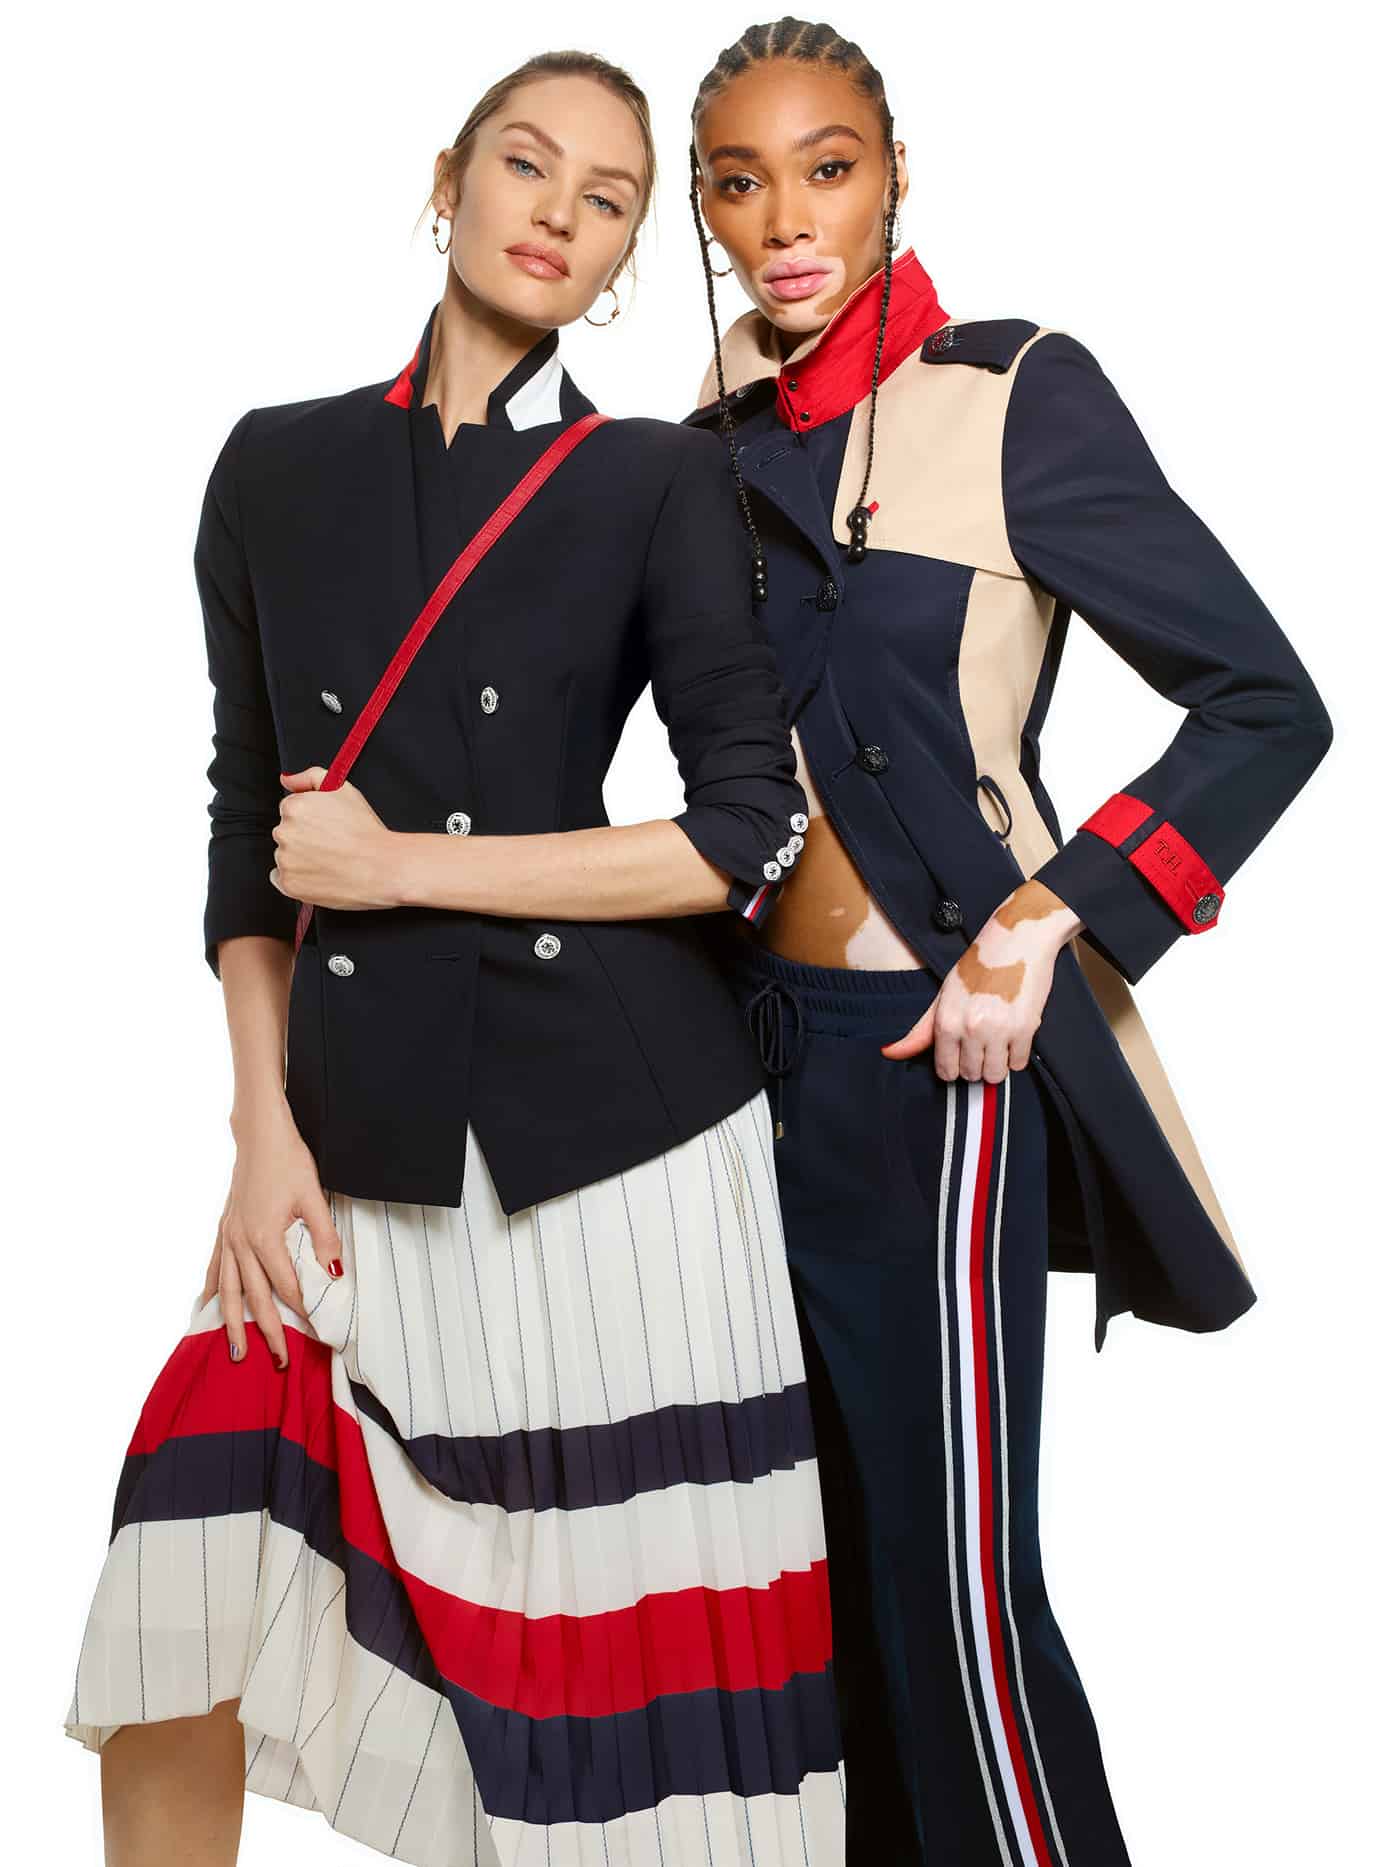 Tommy Hilfiger Taps Top Modesl for 35th Anniversary Campaign